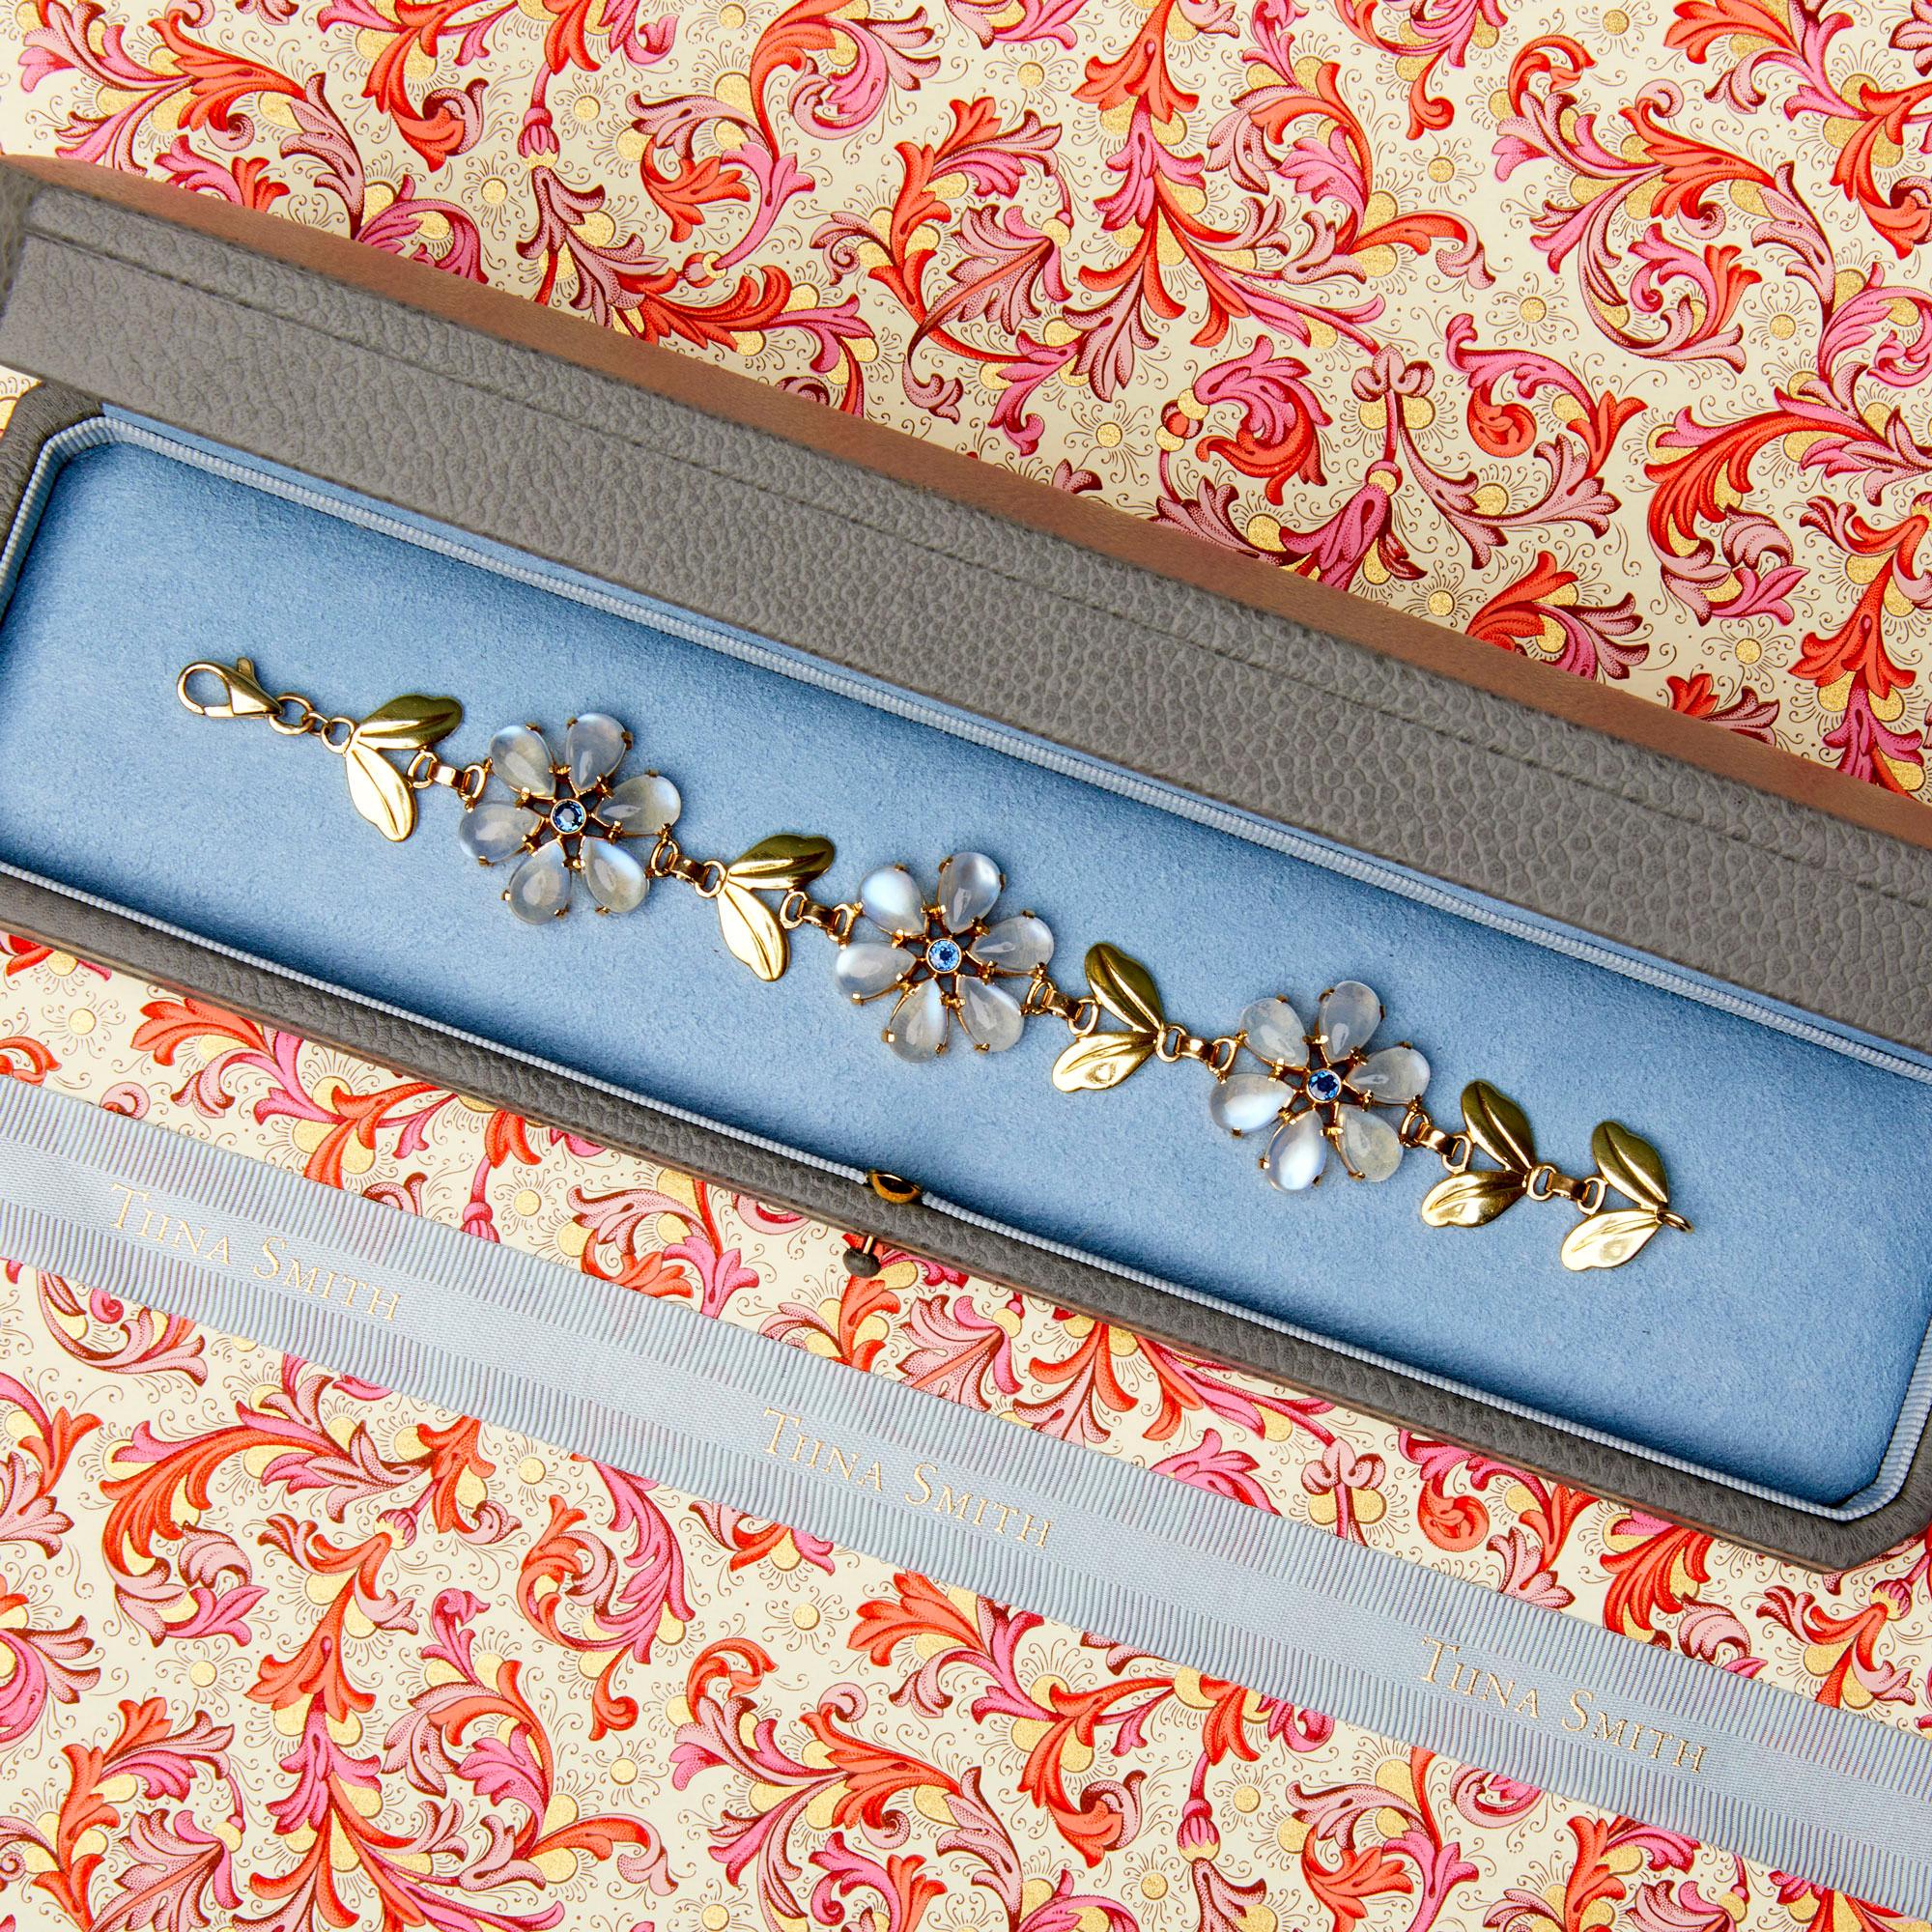 Tiffany & Co. 14k Yellow Gold and Moonstone Bracelet In Excellent Condition For Sale In Weston, MA